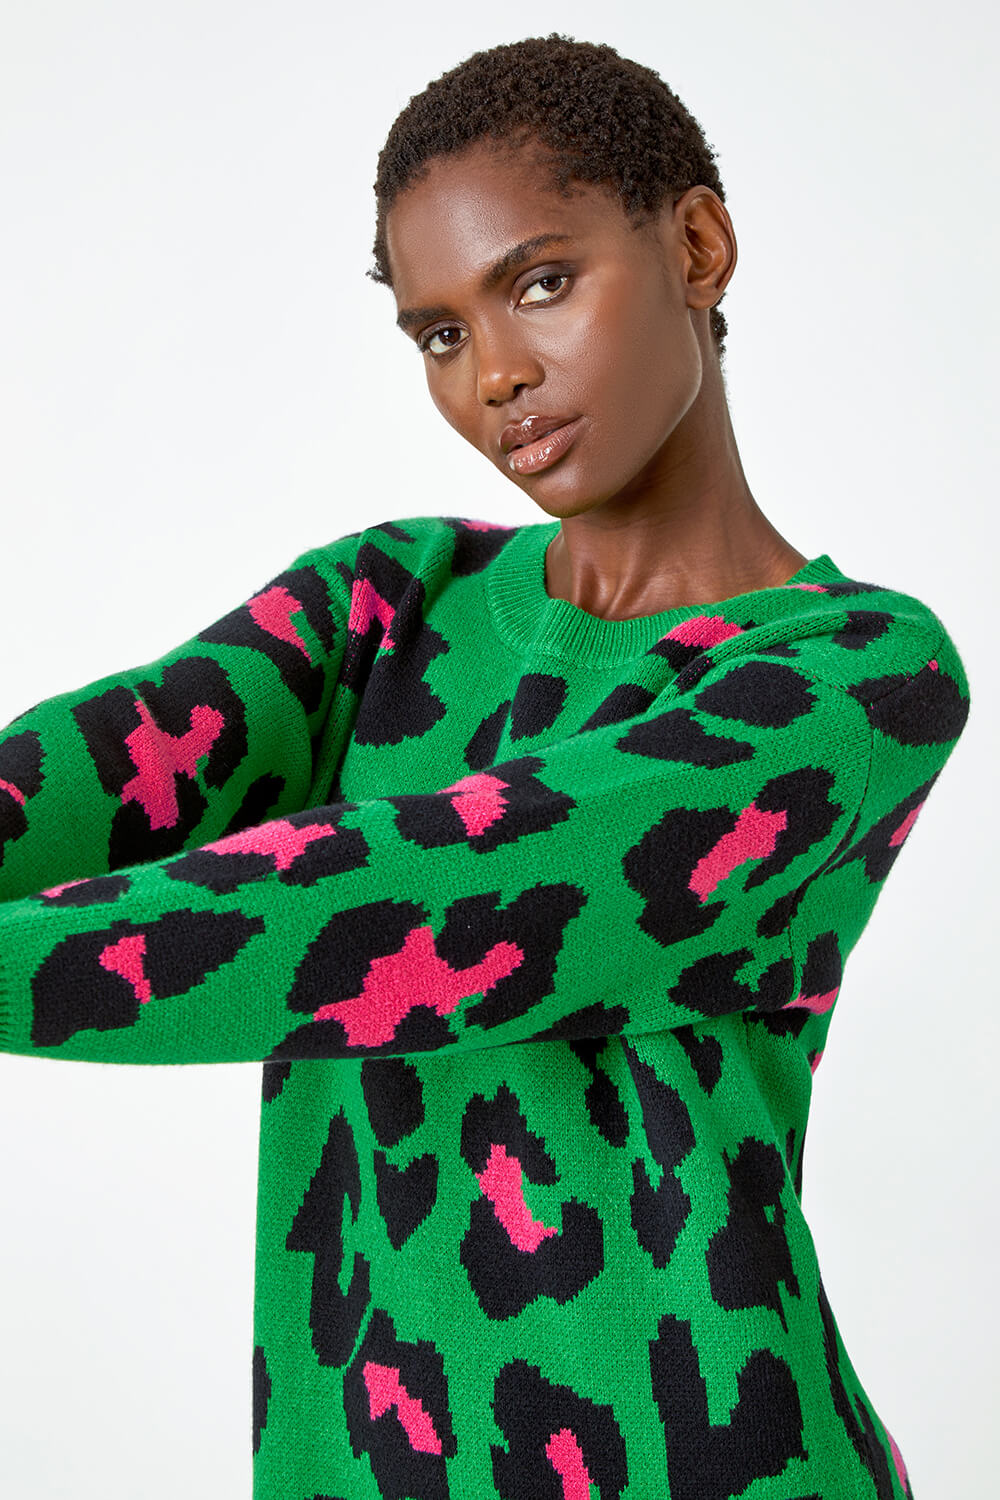 Green Leopard Print Knitted Jumper Dress, Image 4 of 5